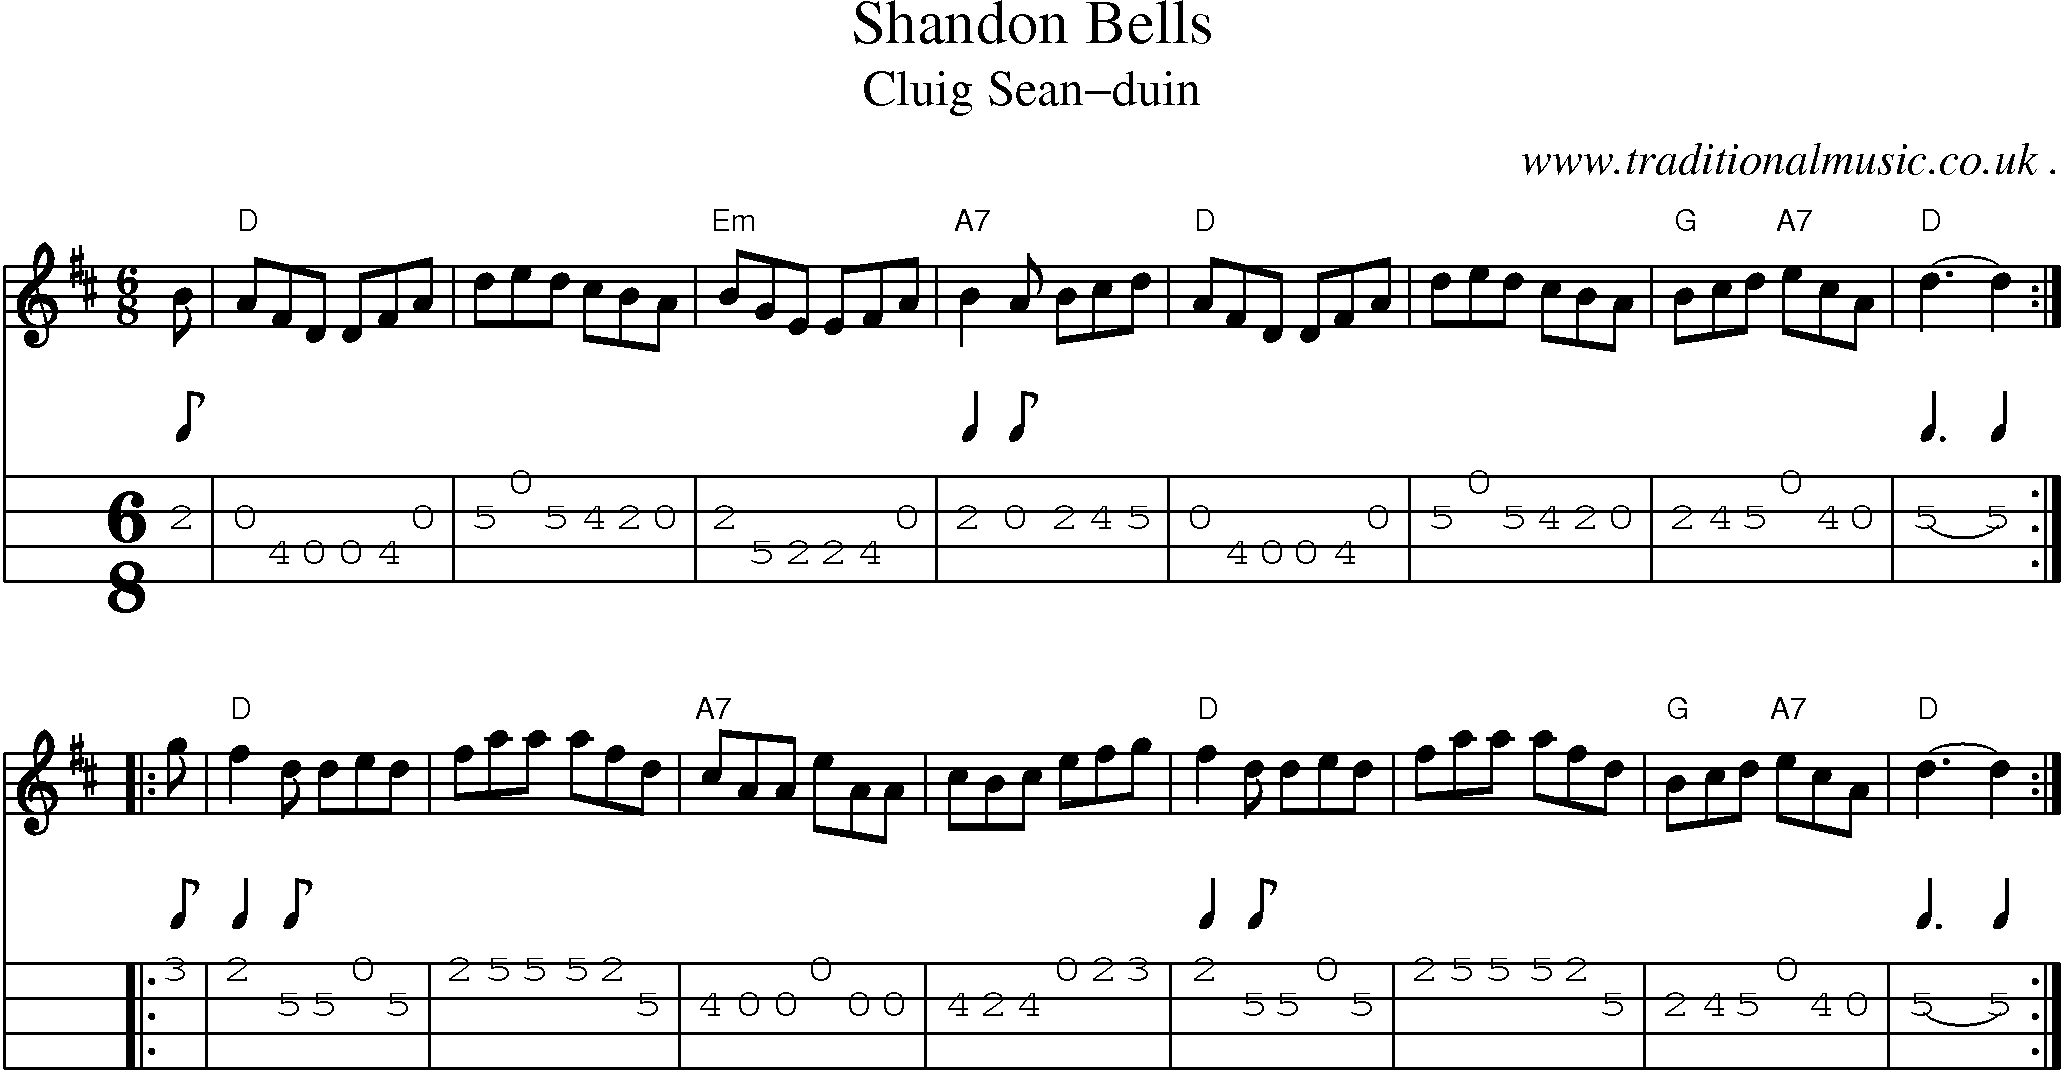 Sheet-music  score, Chords and Mandolin Tabs for Shandon Bells